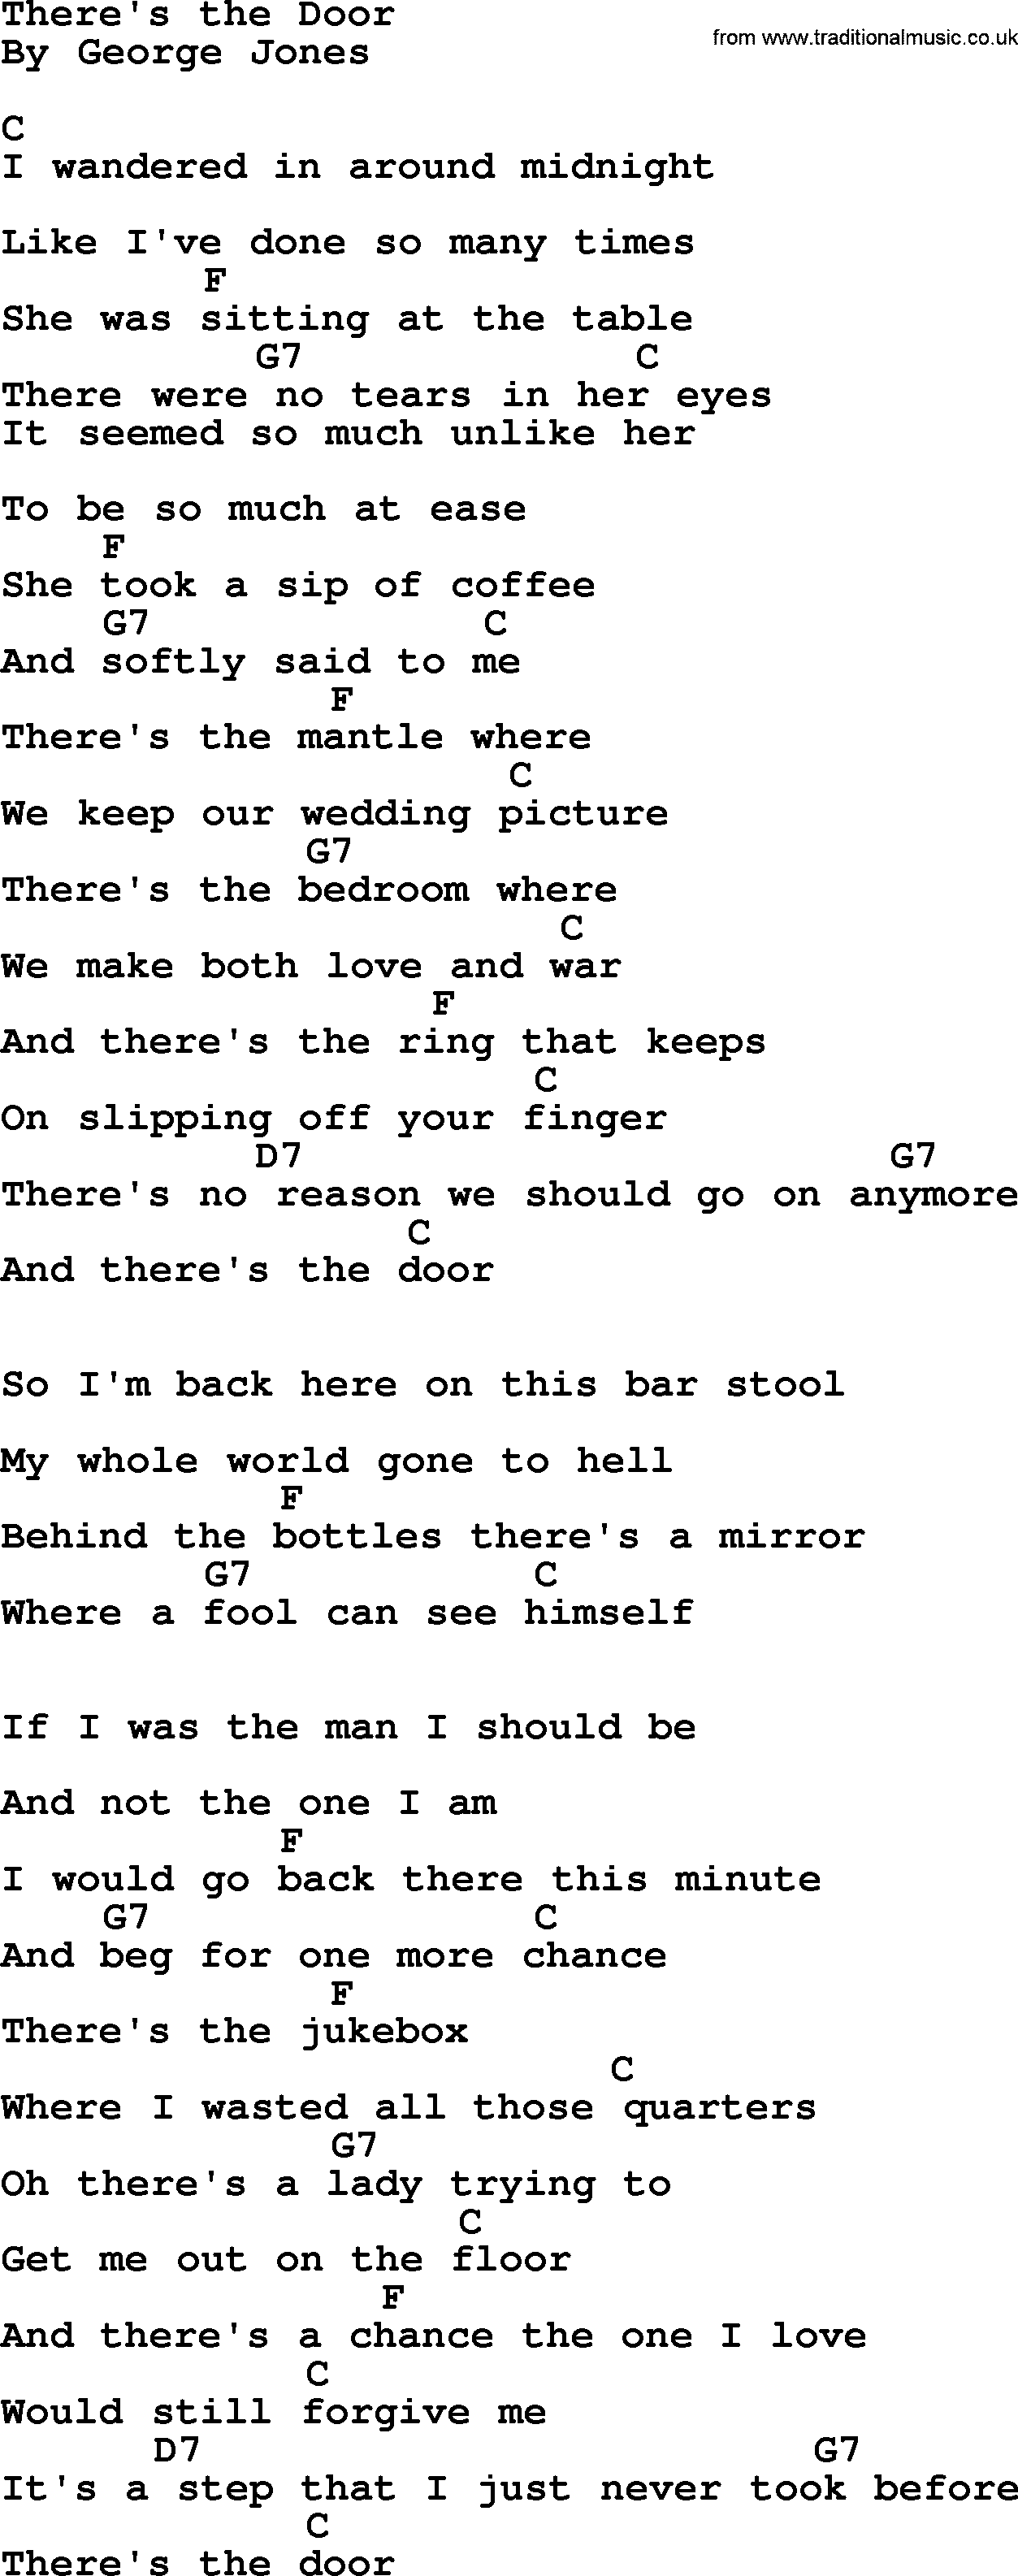 George Jones song: There's The Door, lyrics and chords